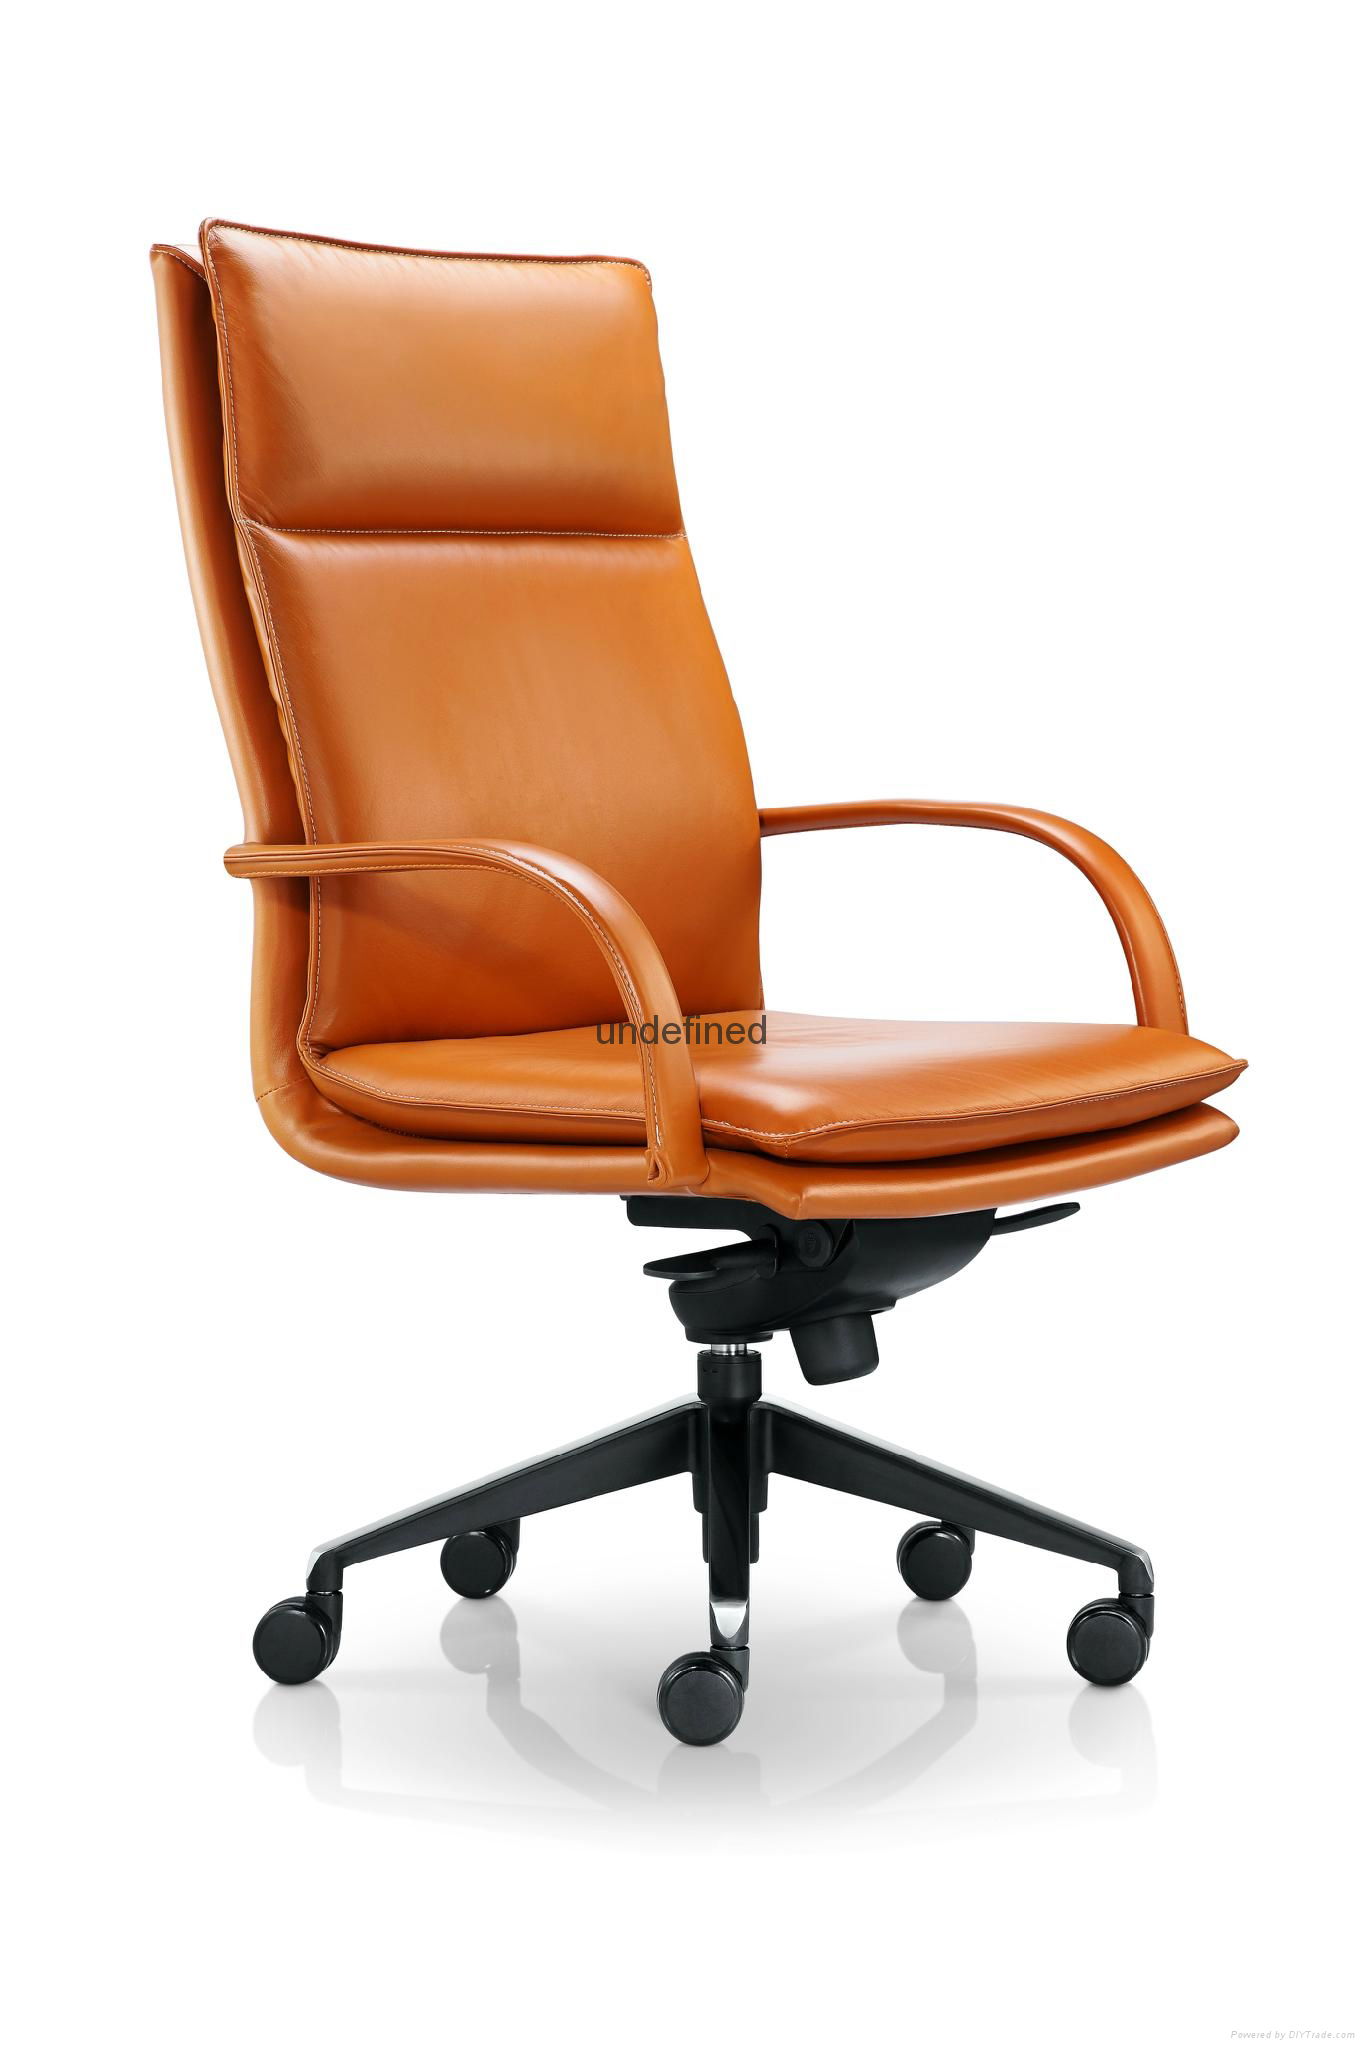 Executive chairs 2